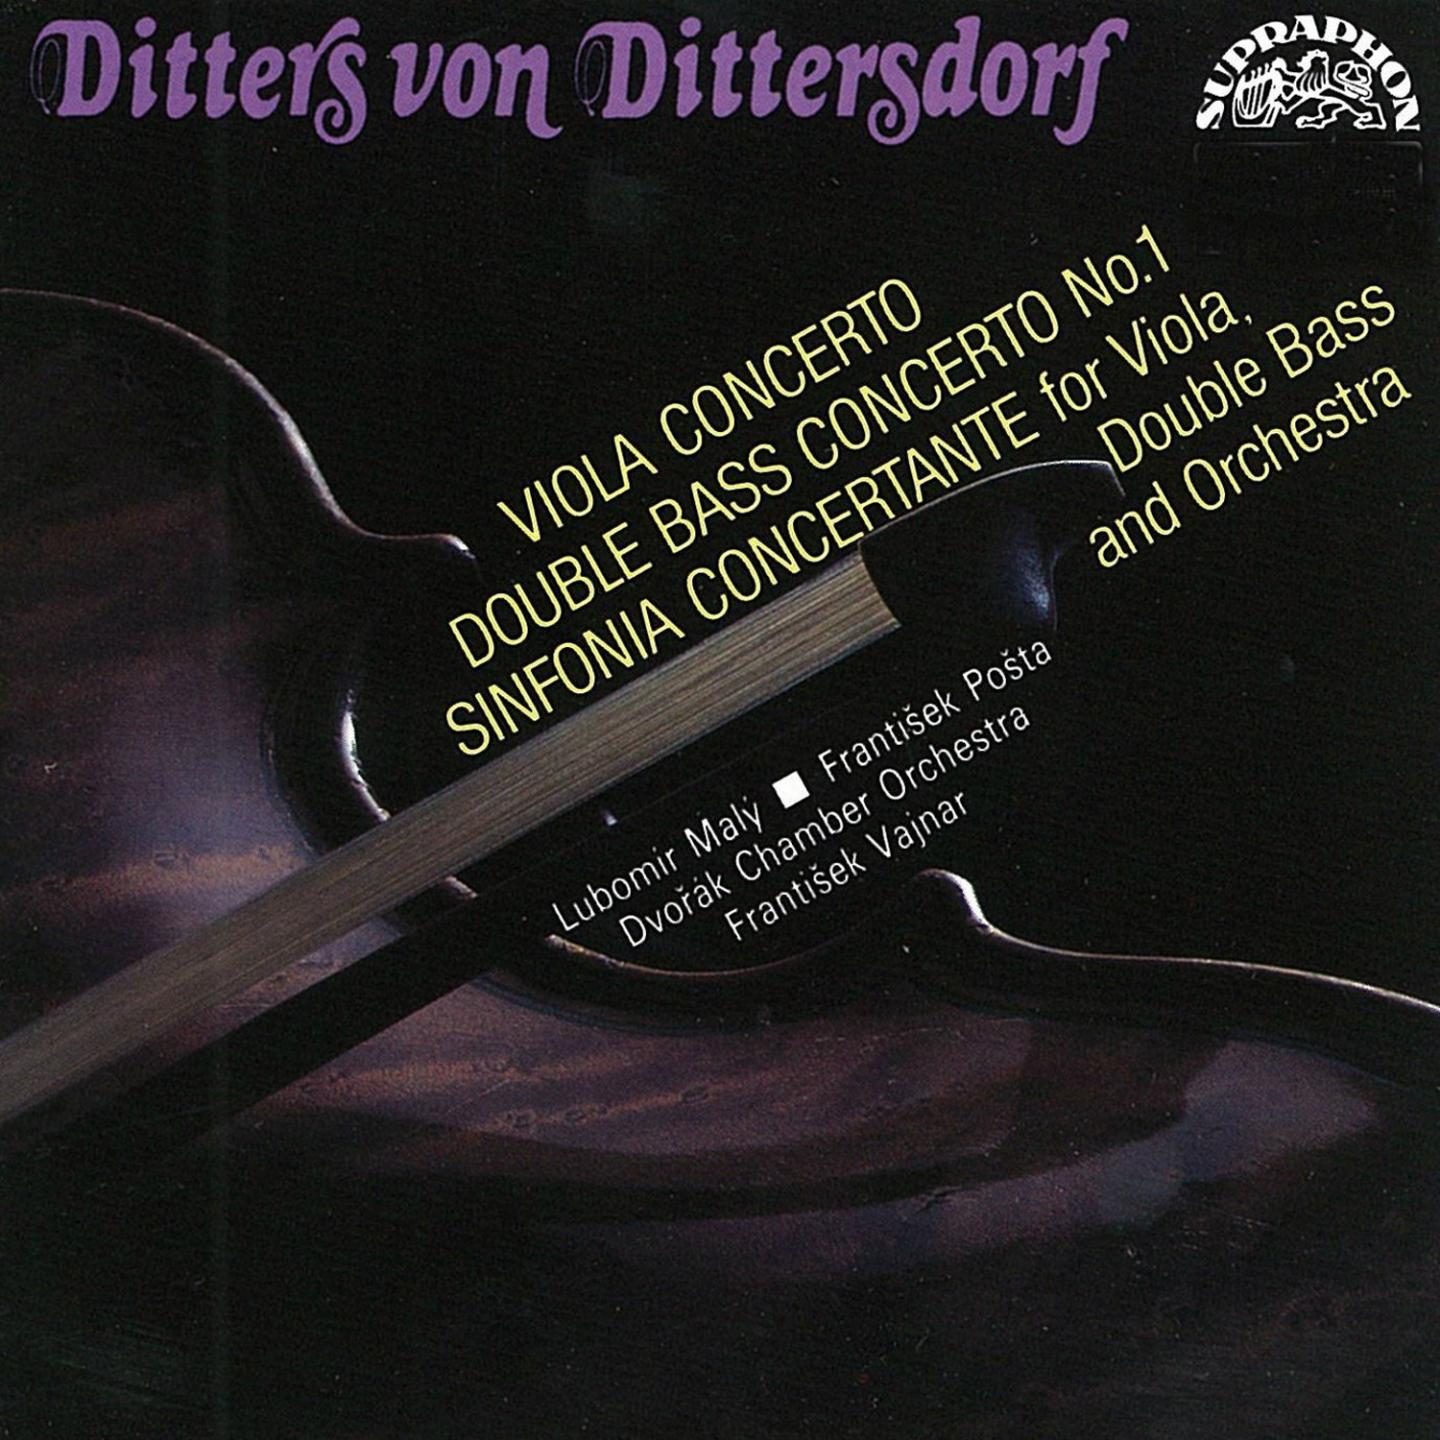 Sinfonia Concertante for Viola, Double Bass and Orchestra: IV. Allegro ma non troppo